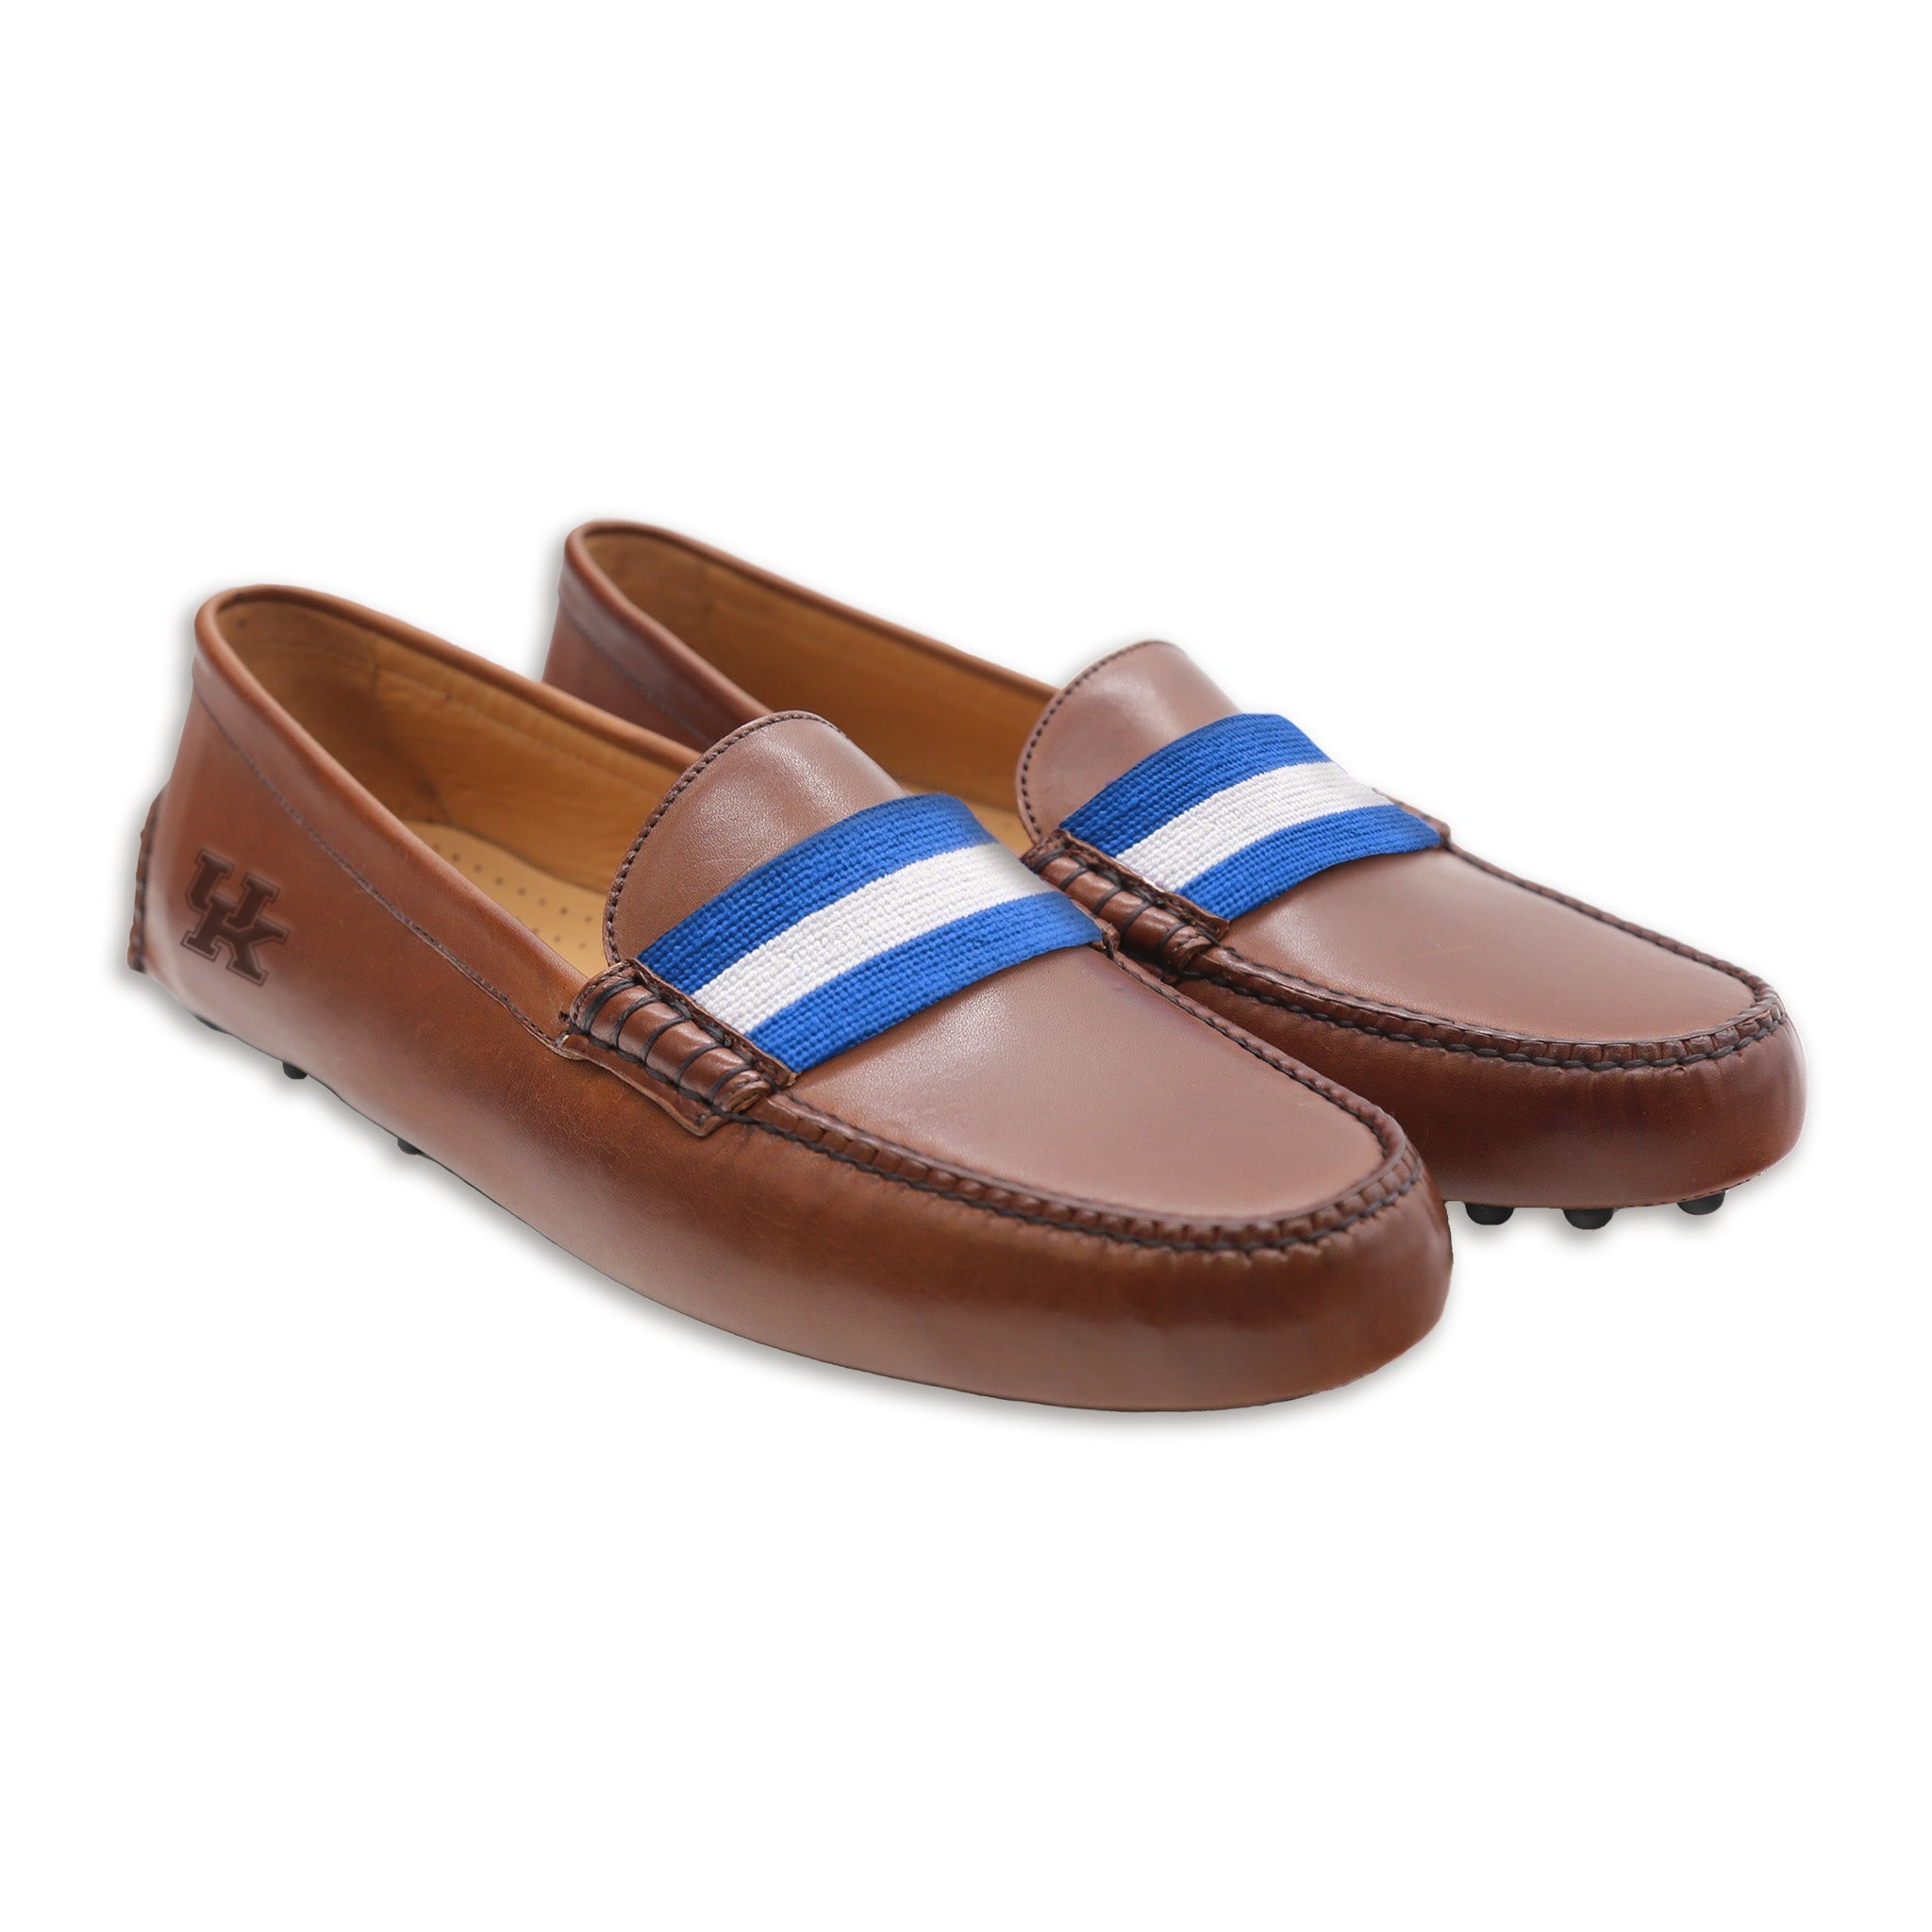 Kentucky Surcingle Driving & Branson Leather-Logo) (Blue-White) Shoes (Chestnut – Smathers